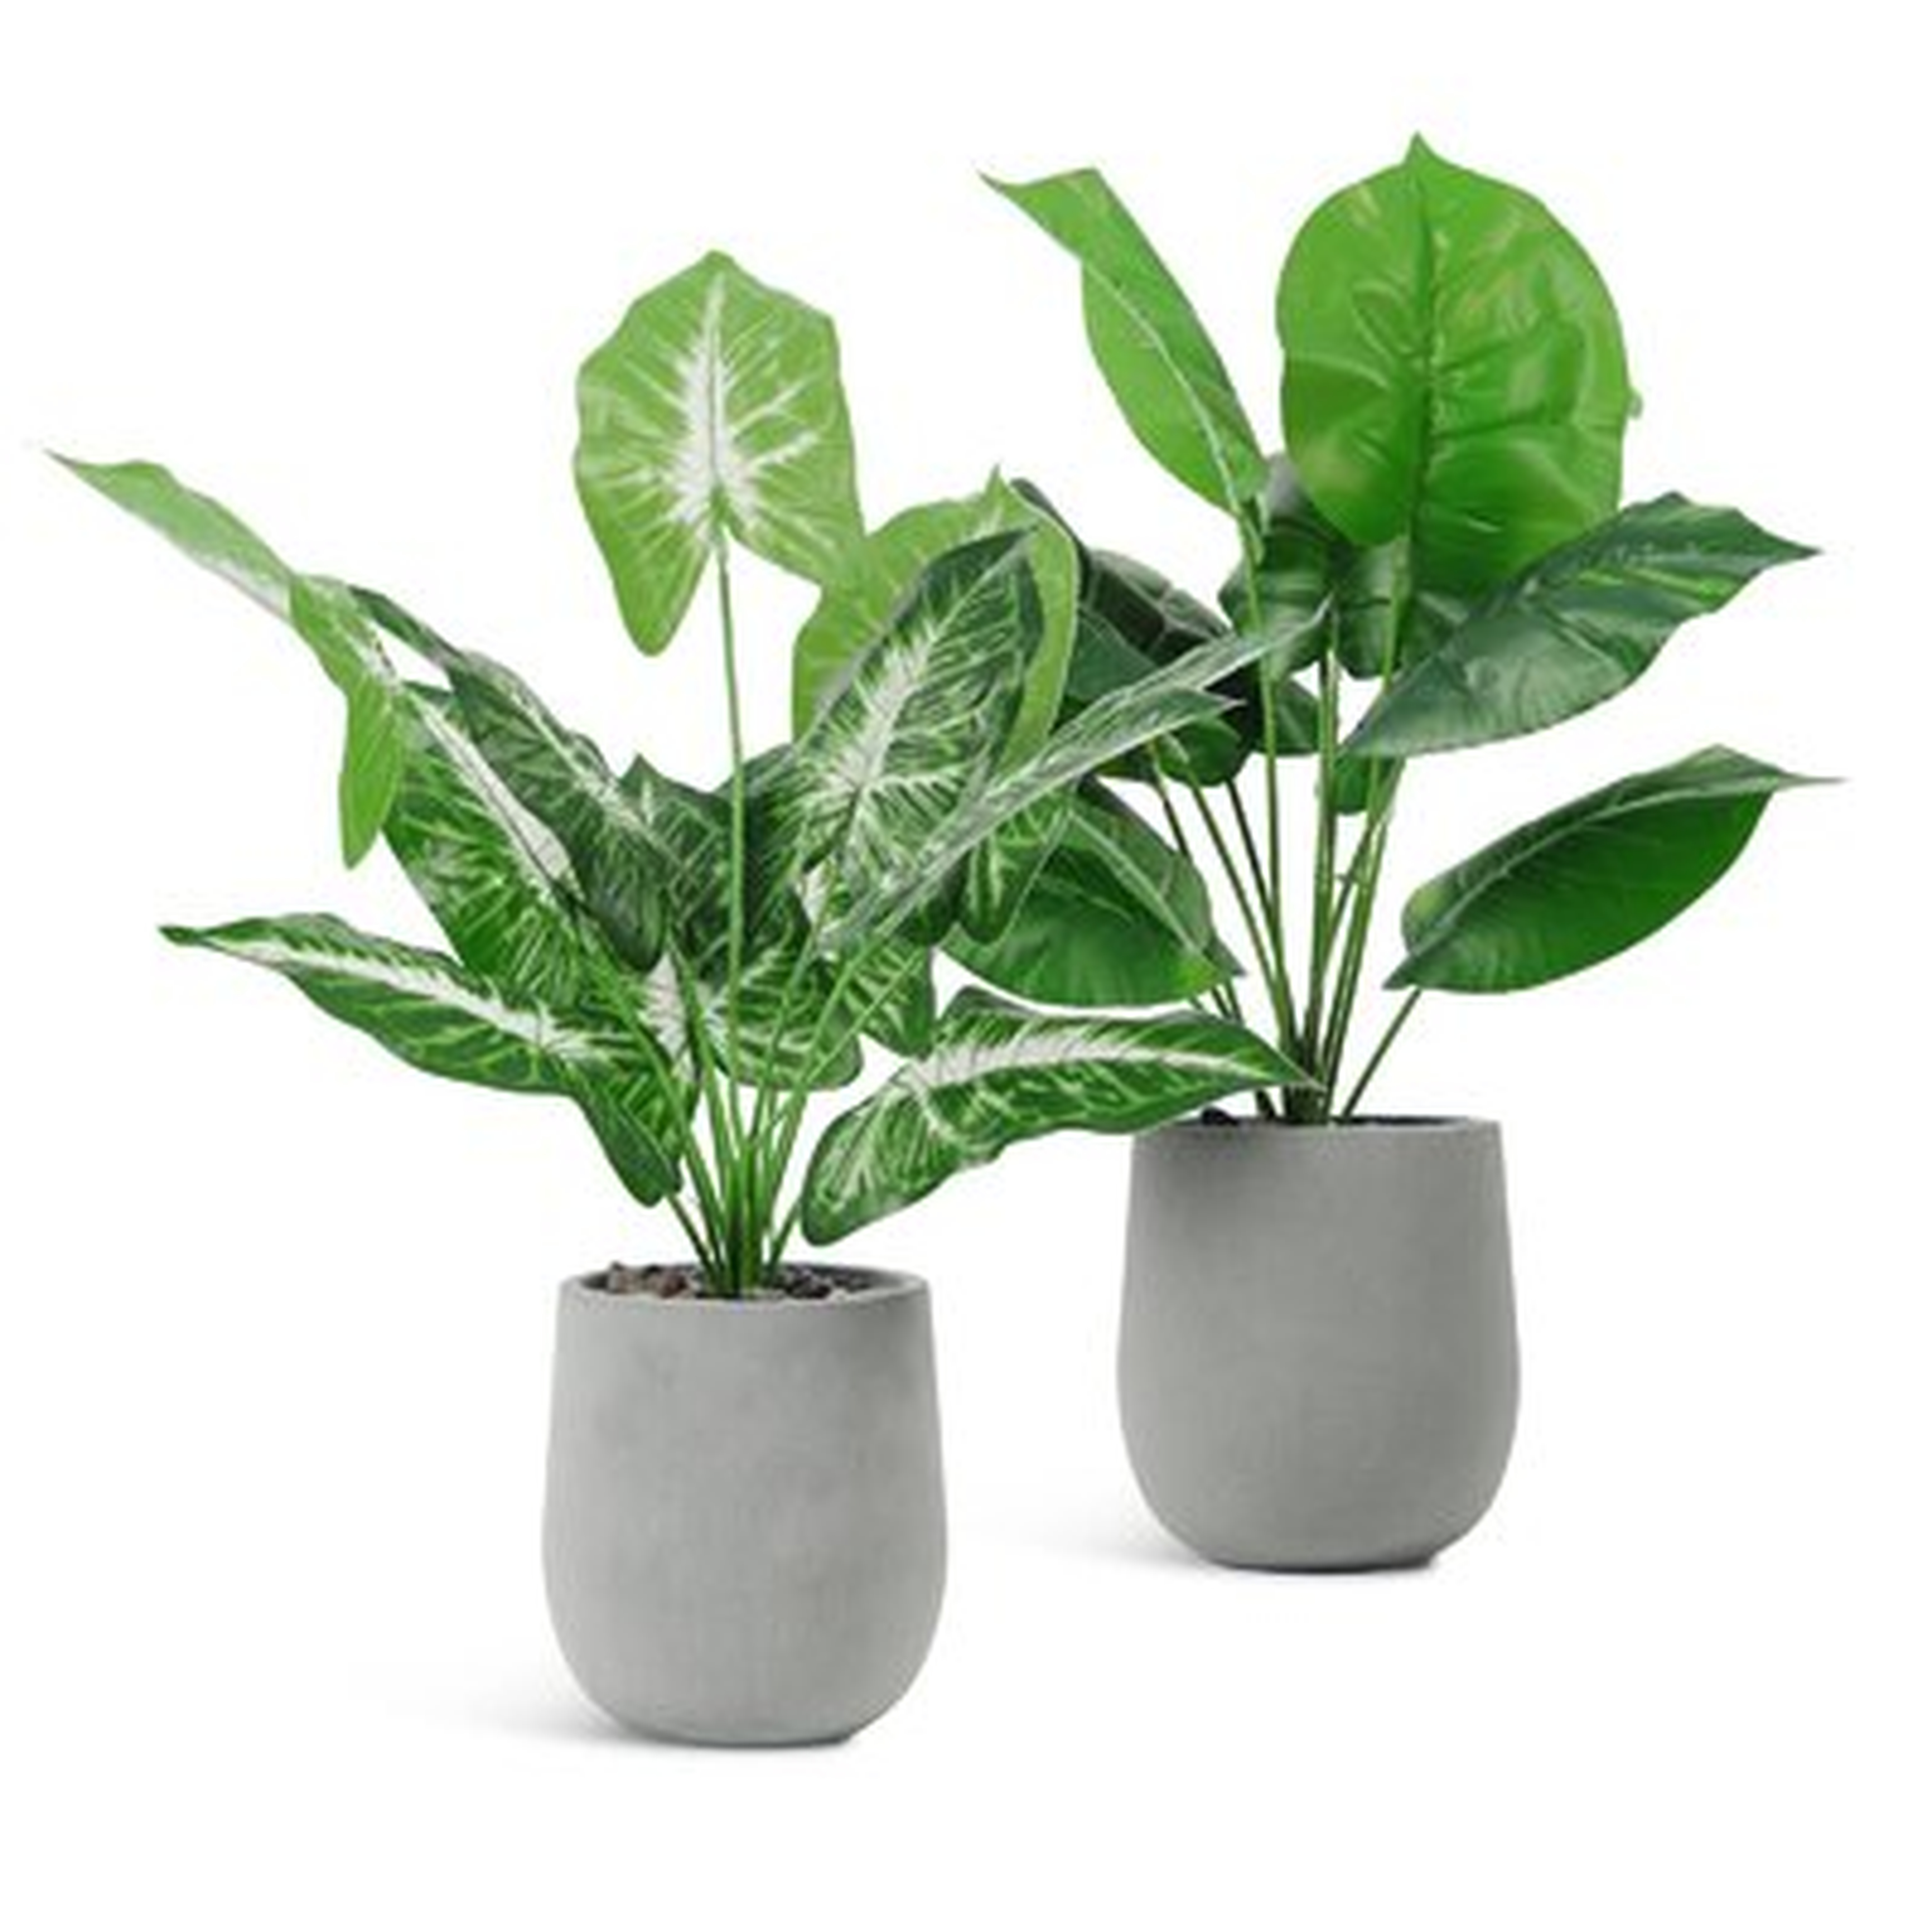 Plants Topiary Shrubs Fake Plants With Gray Pot For Tabletop Bathroom House Decoration - Wayfair